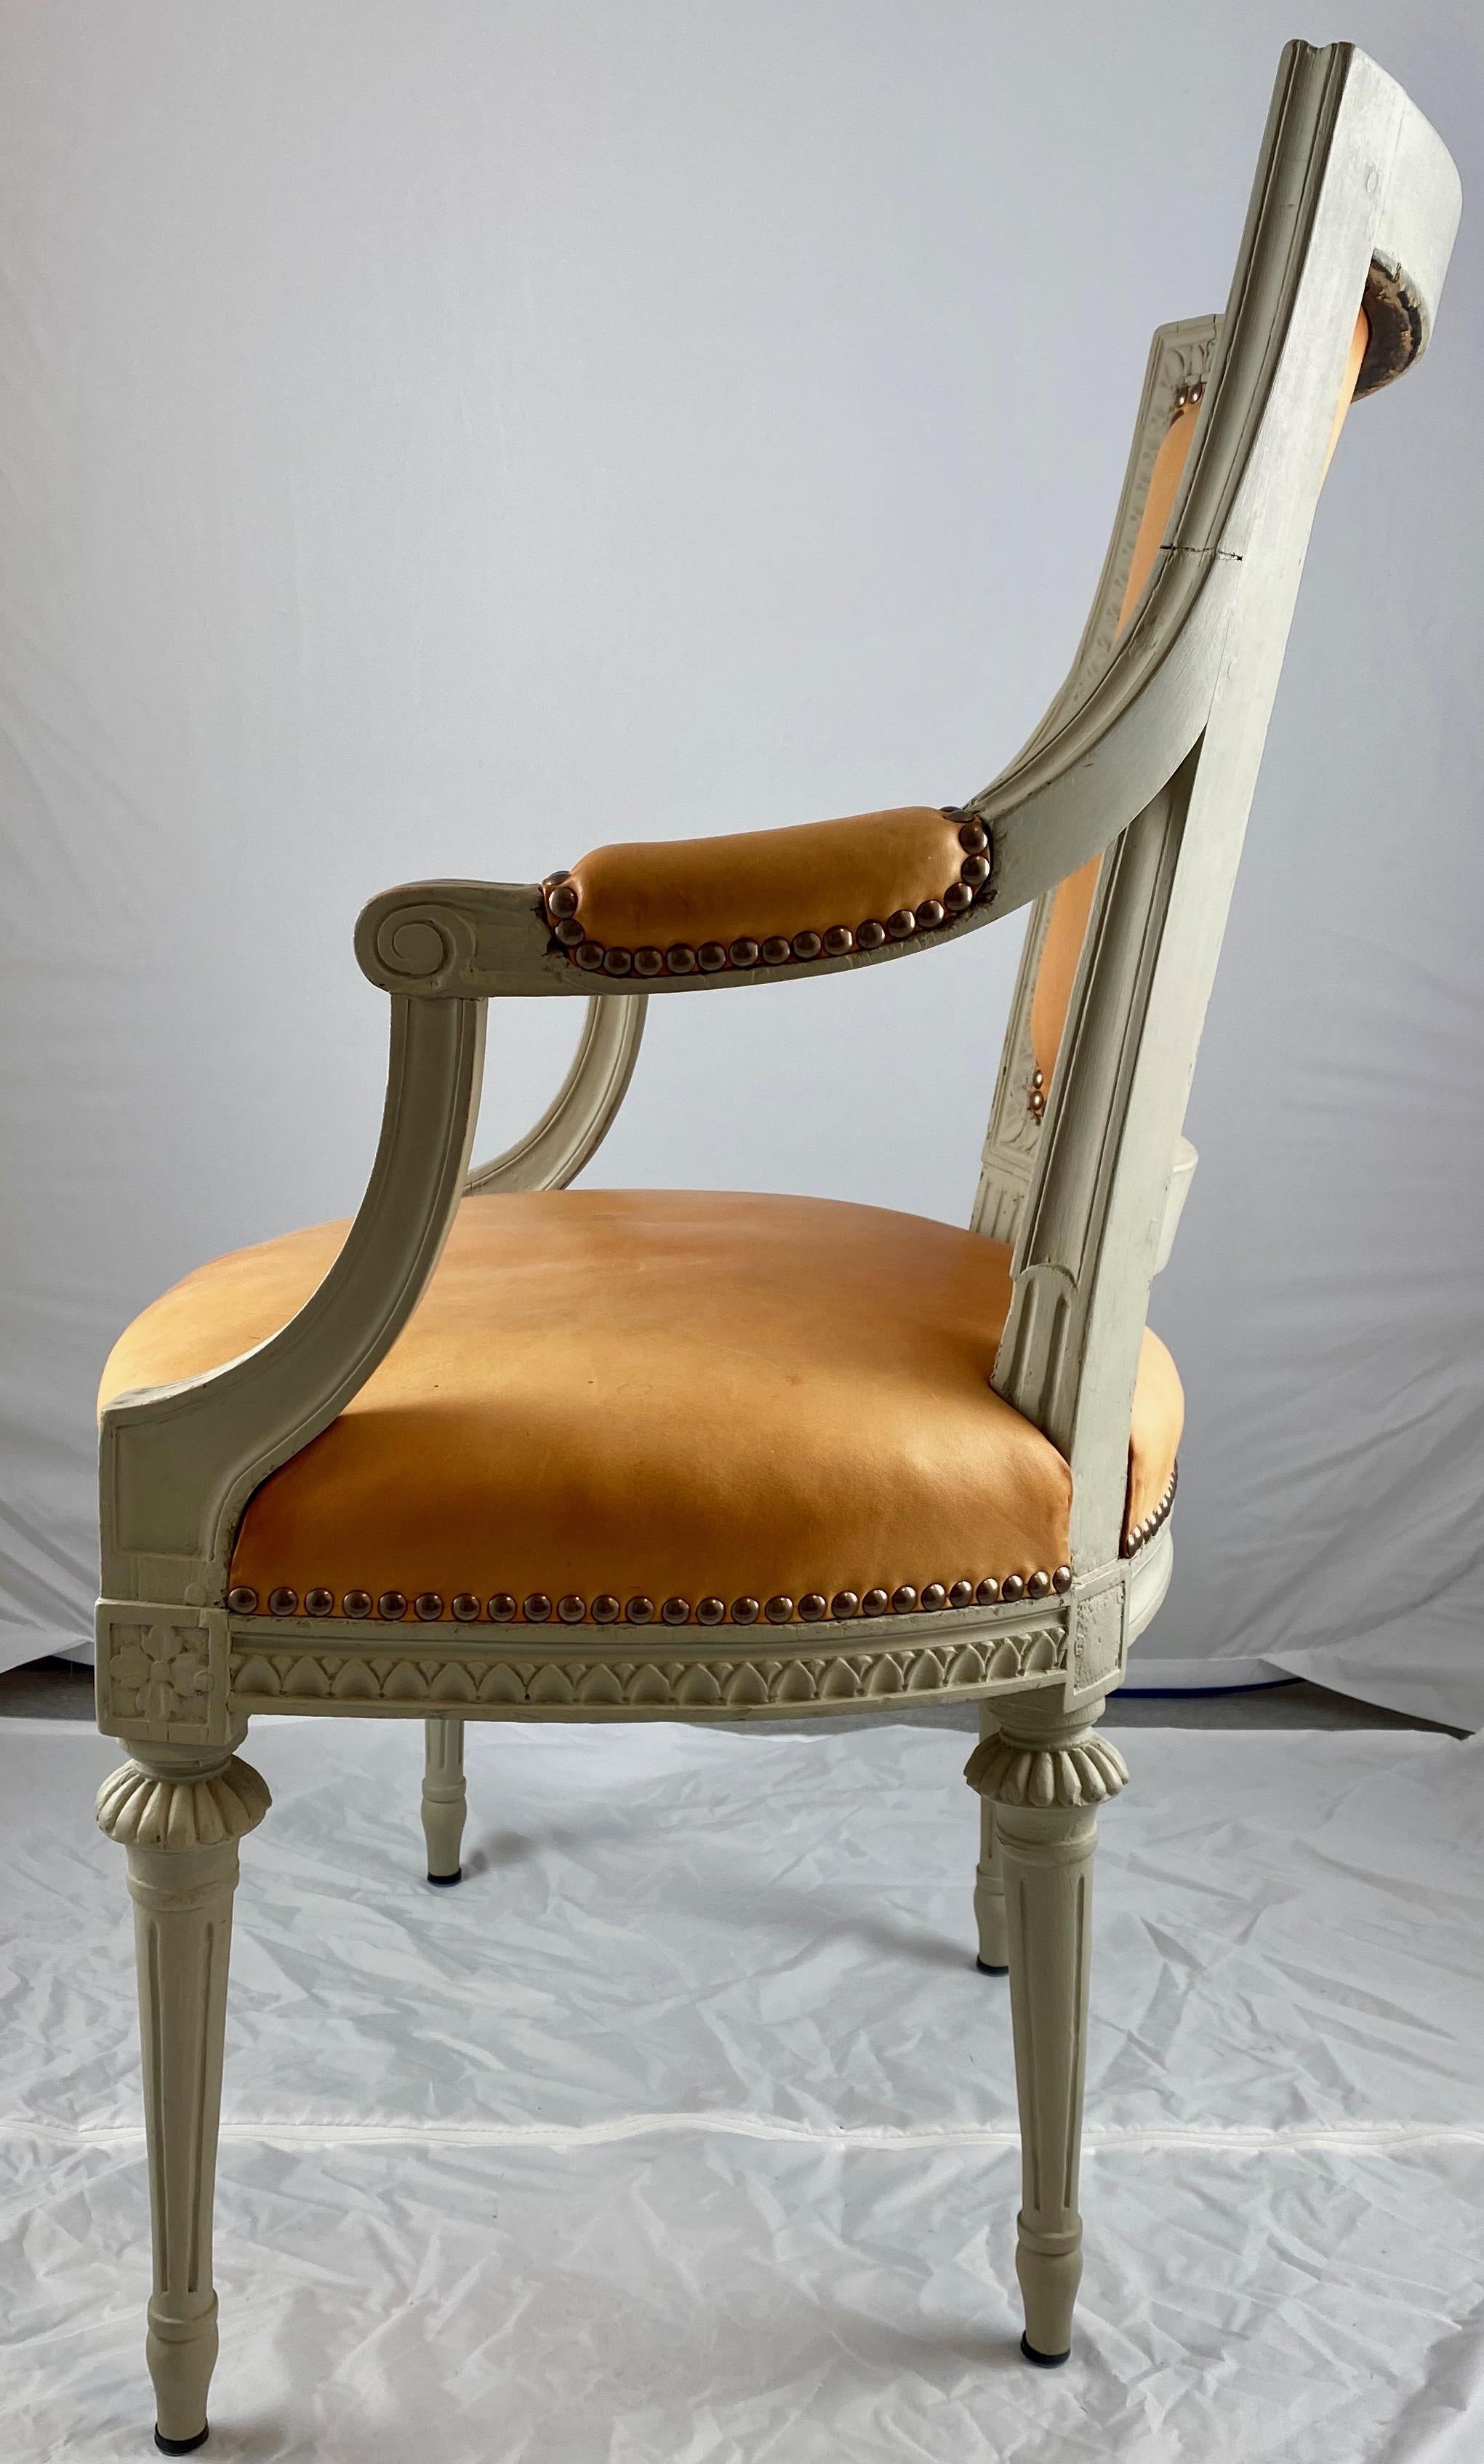 A beautiful Swedish armchair made in the late 18th century upholstered in leather.